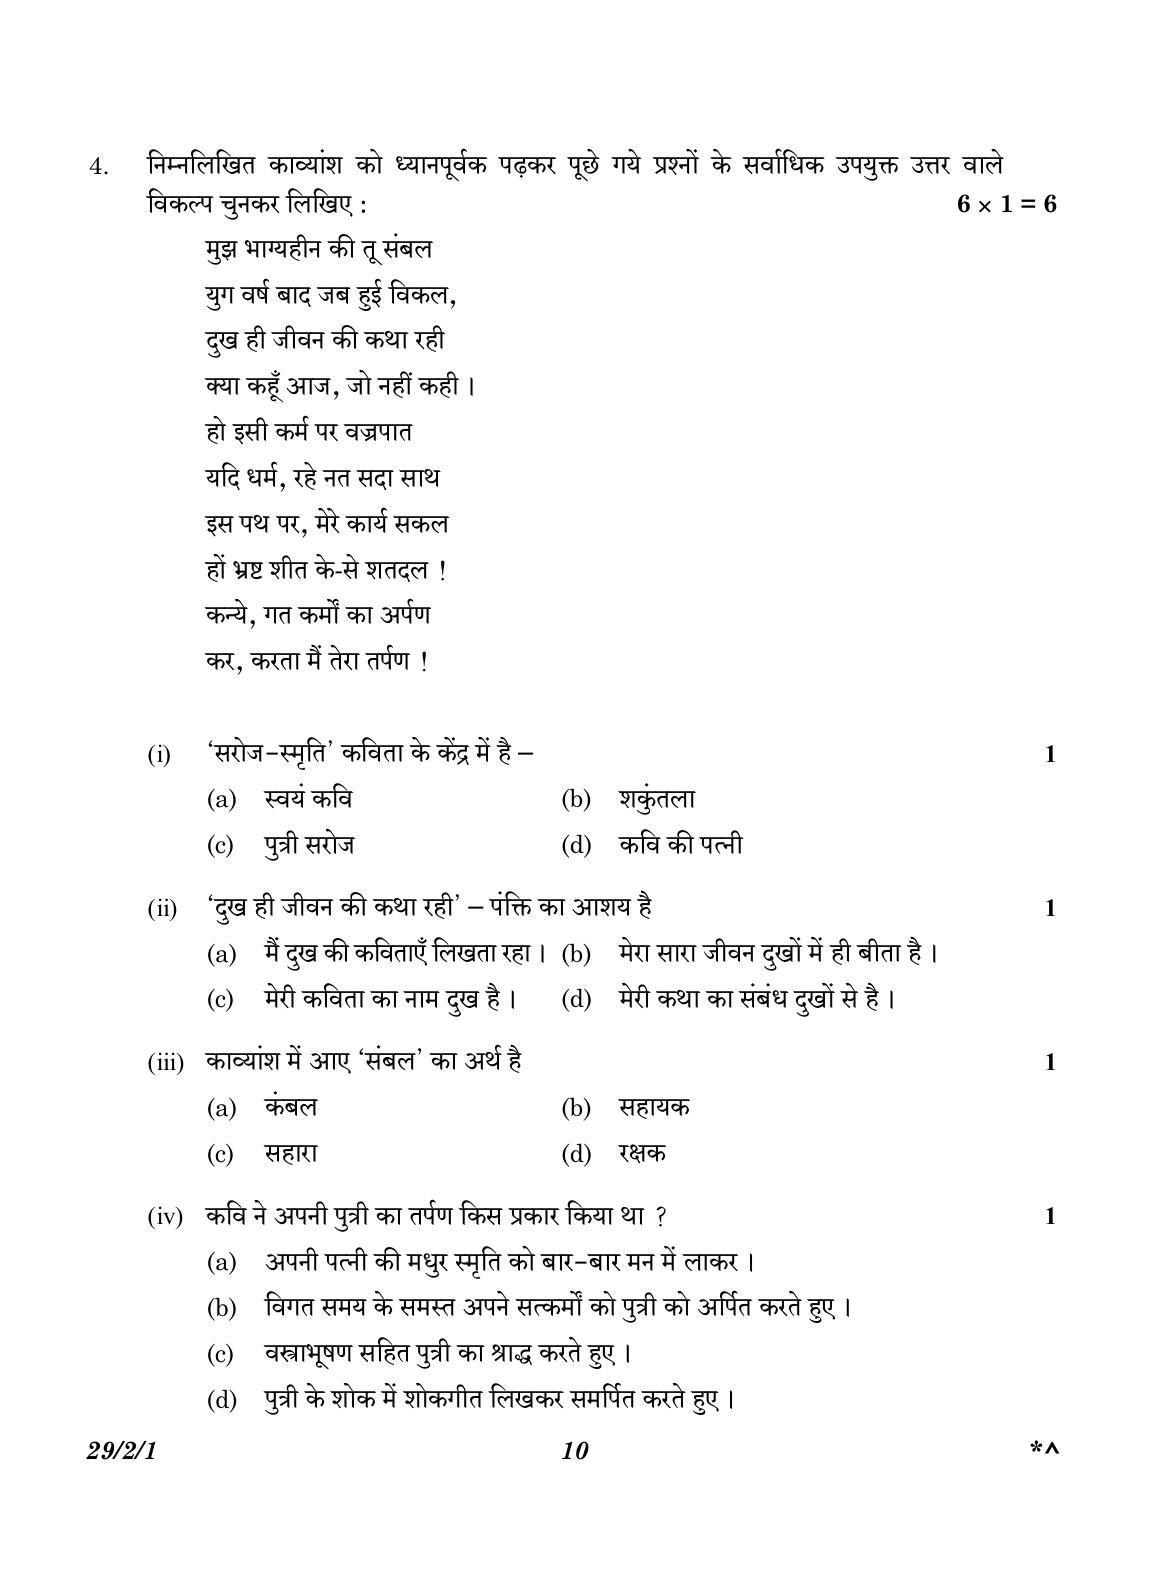 CBSE Class 12 29-2-1 Hindi Elective 2023 Question Paper - Page 10